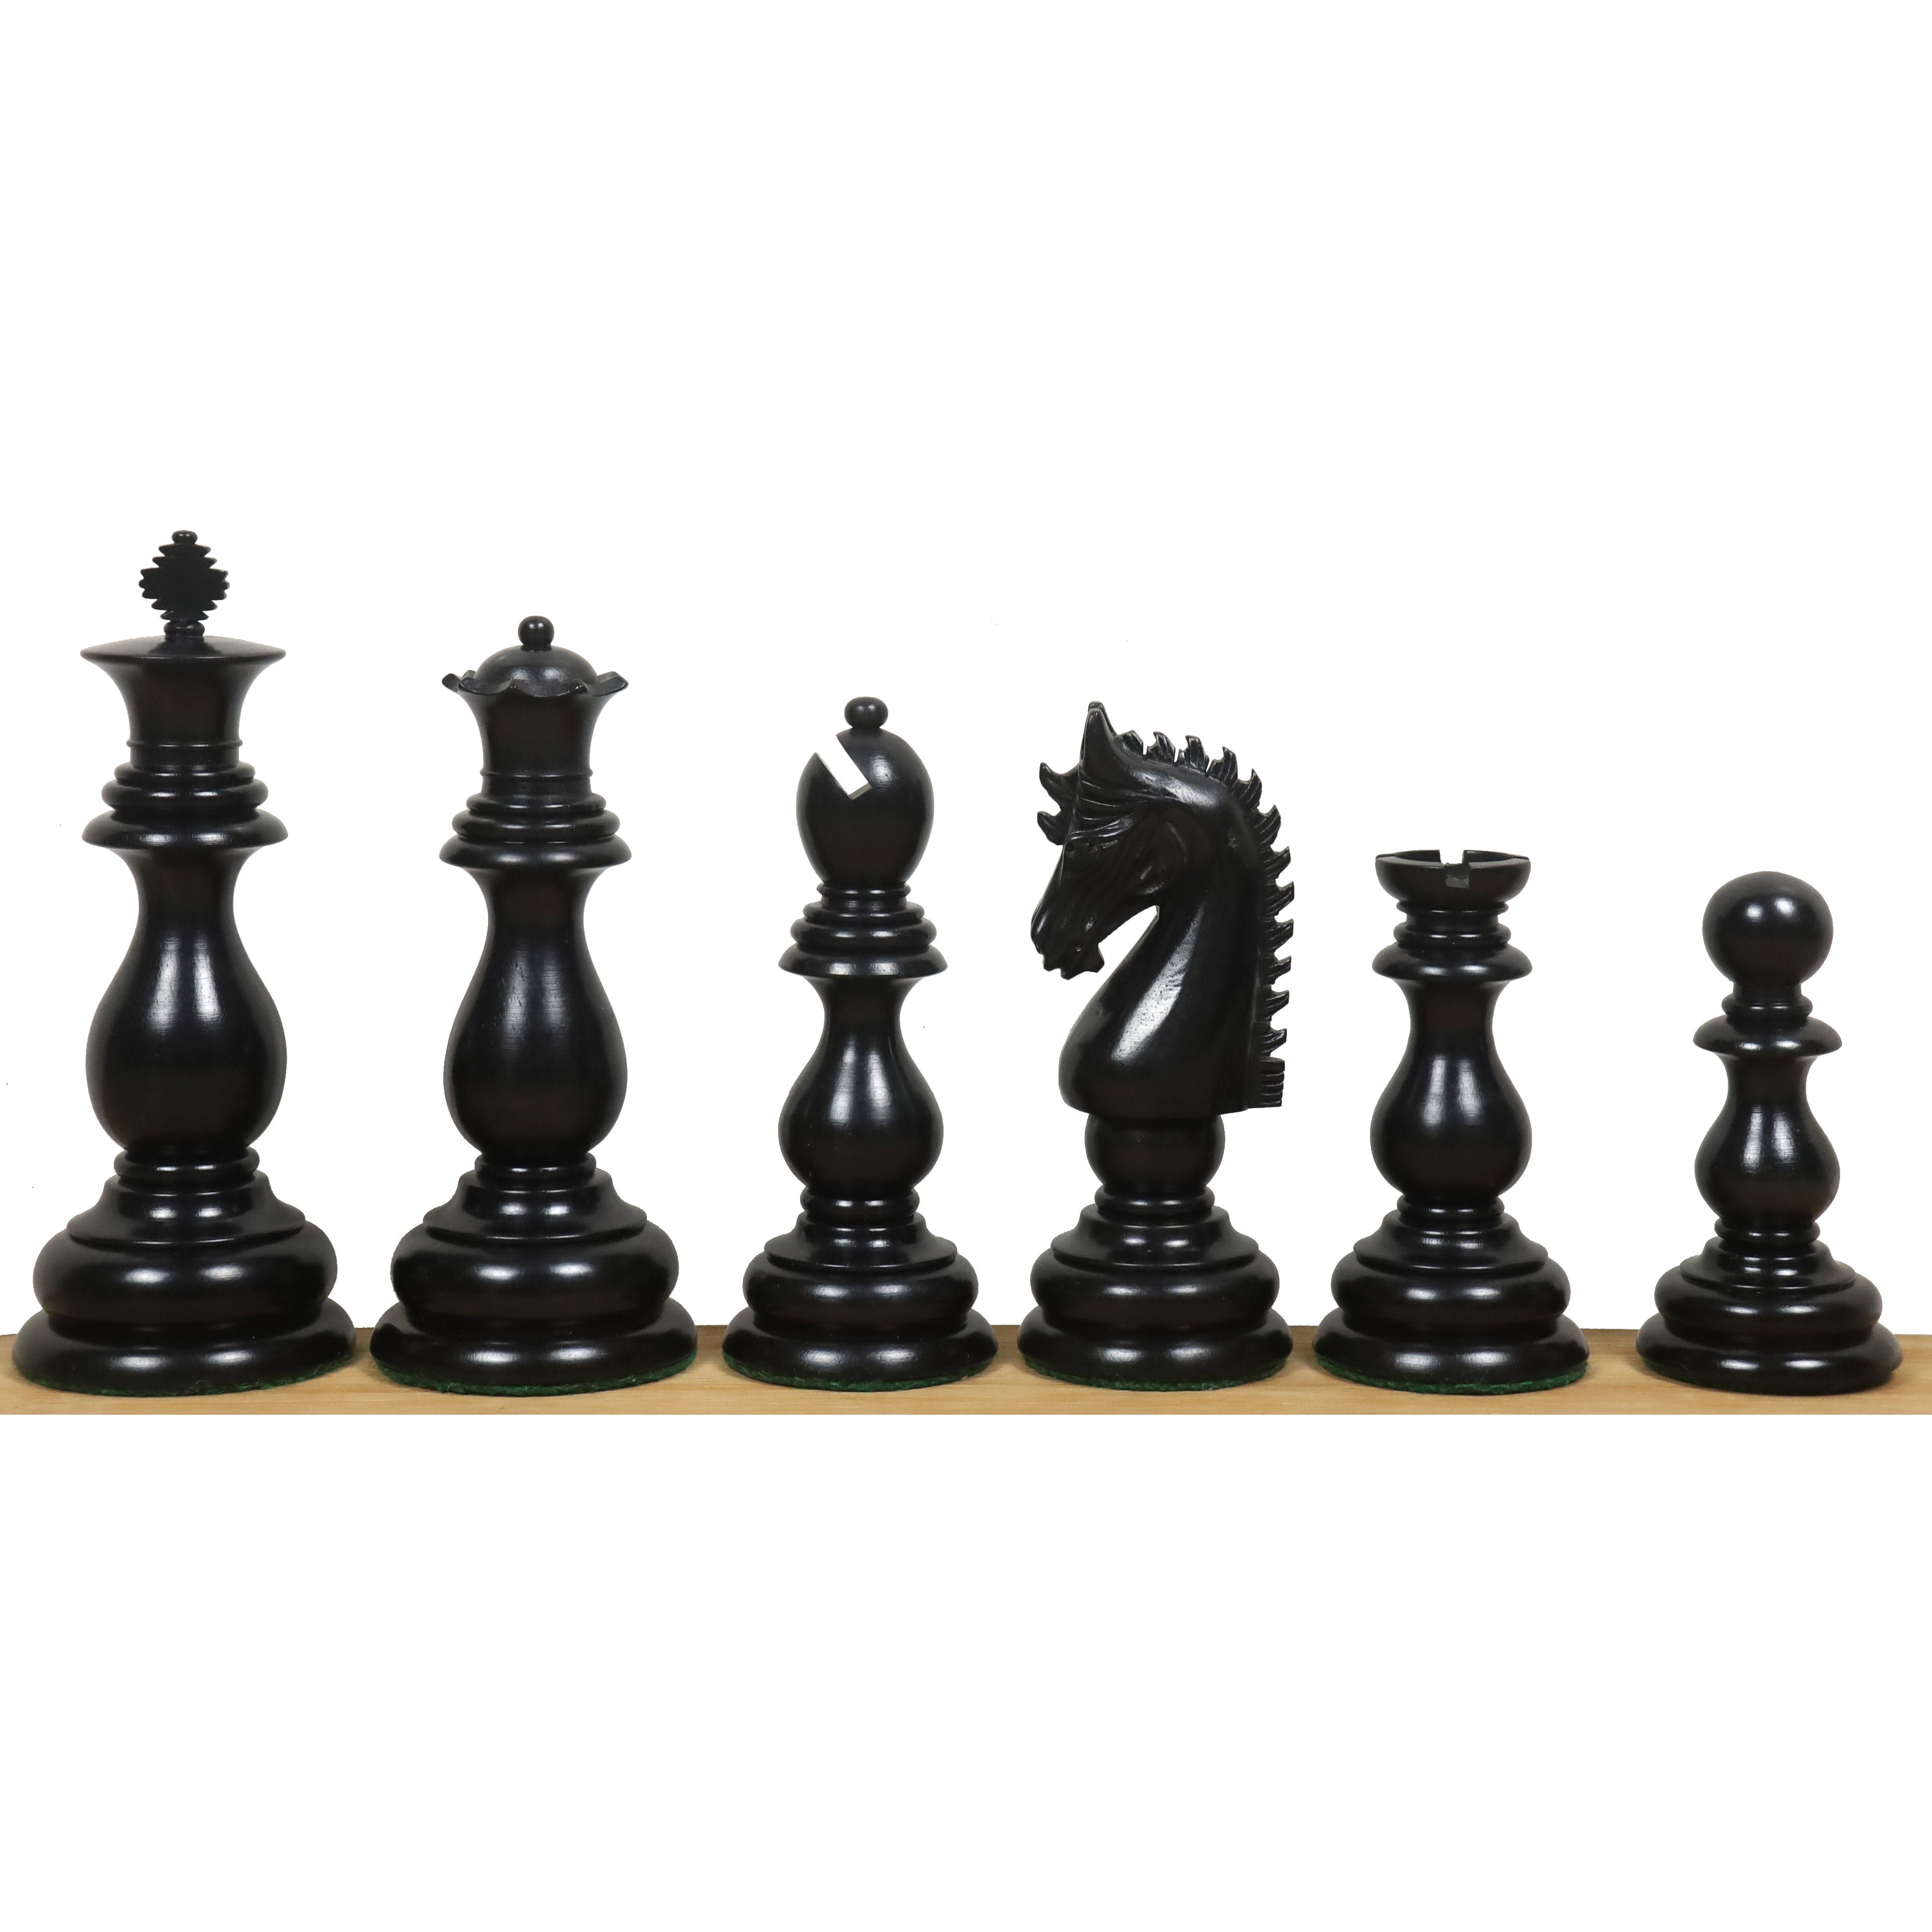 Slightly Imperfect 4.6" Medallion Luxury Staunton Chess Pieces Only Set